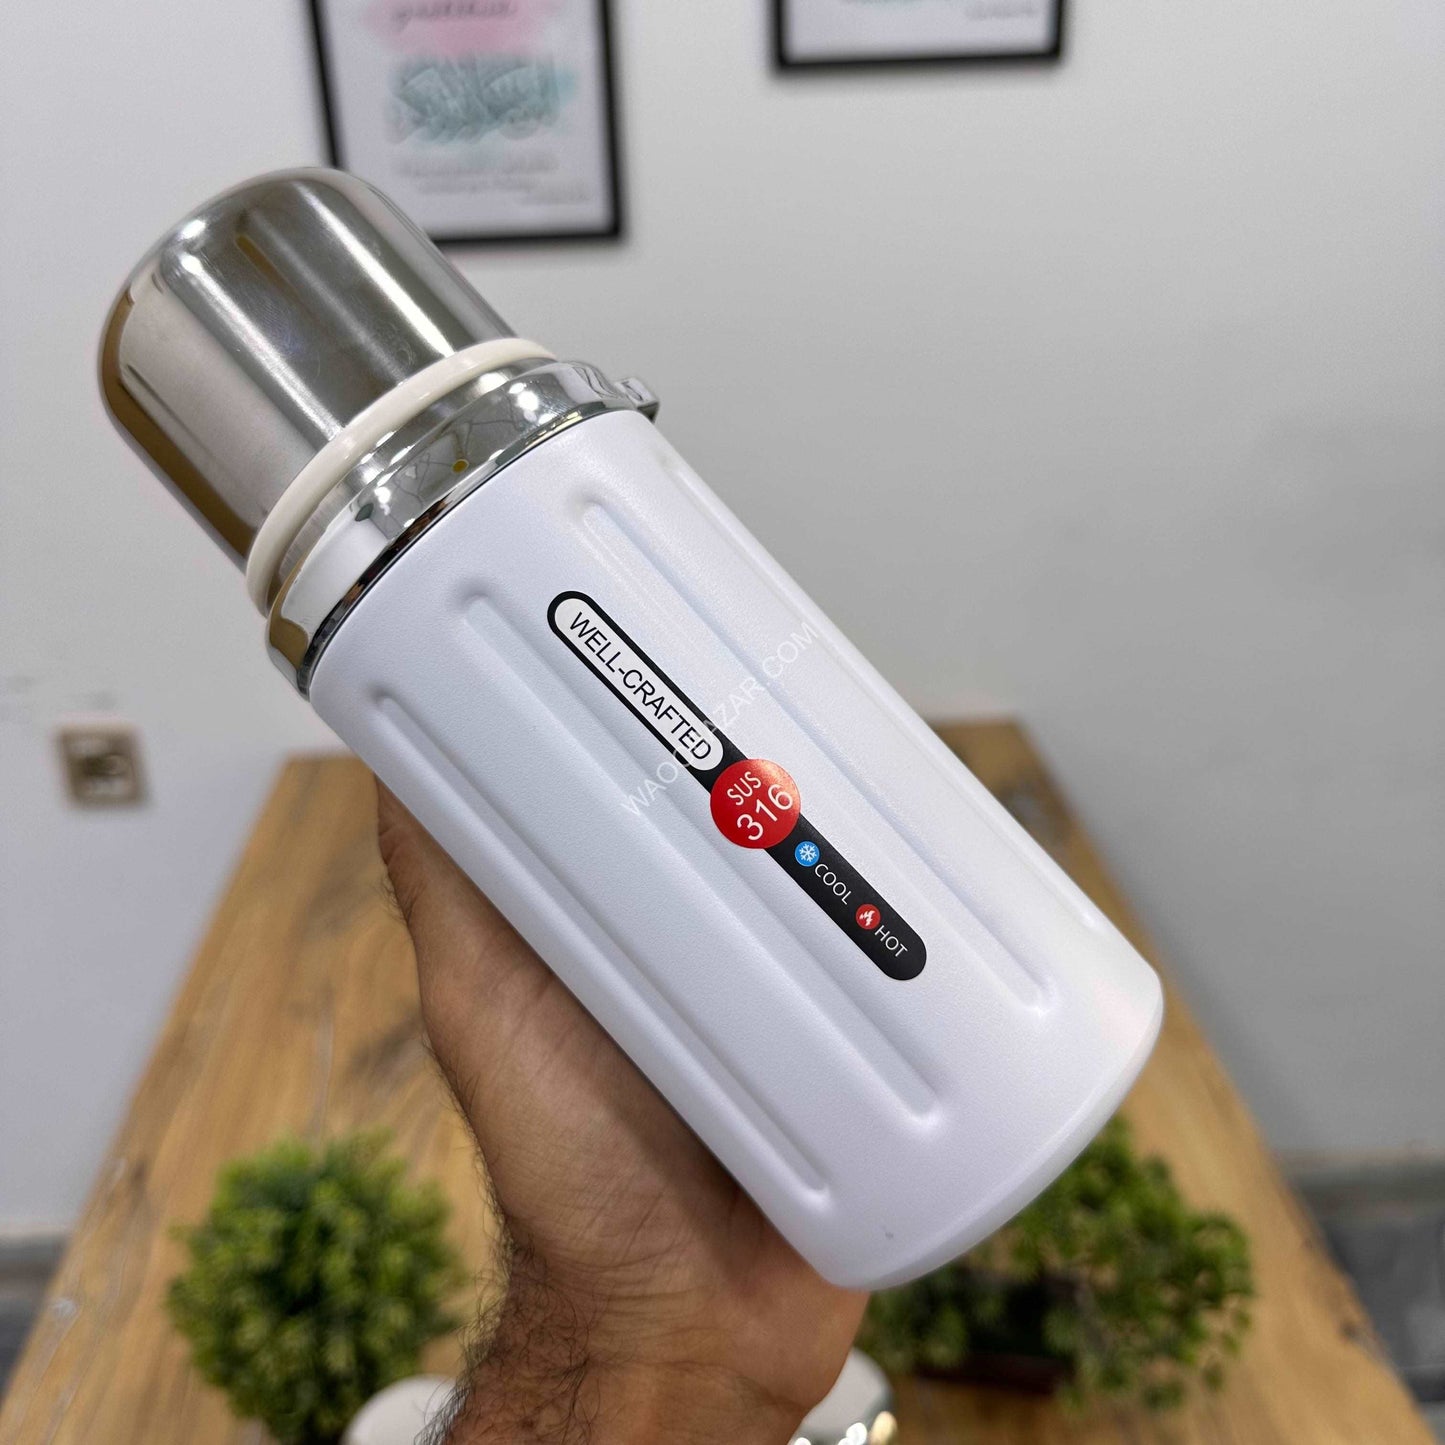 600 ml Stainless Steel Vacuum Bottle - Hot & Cold